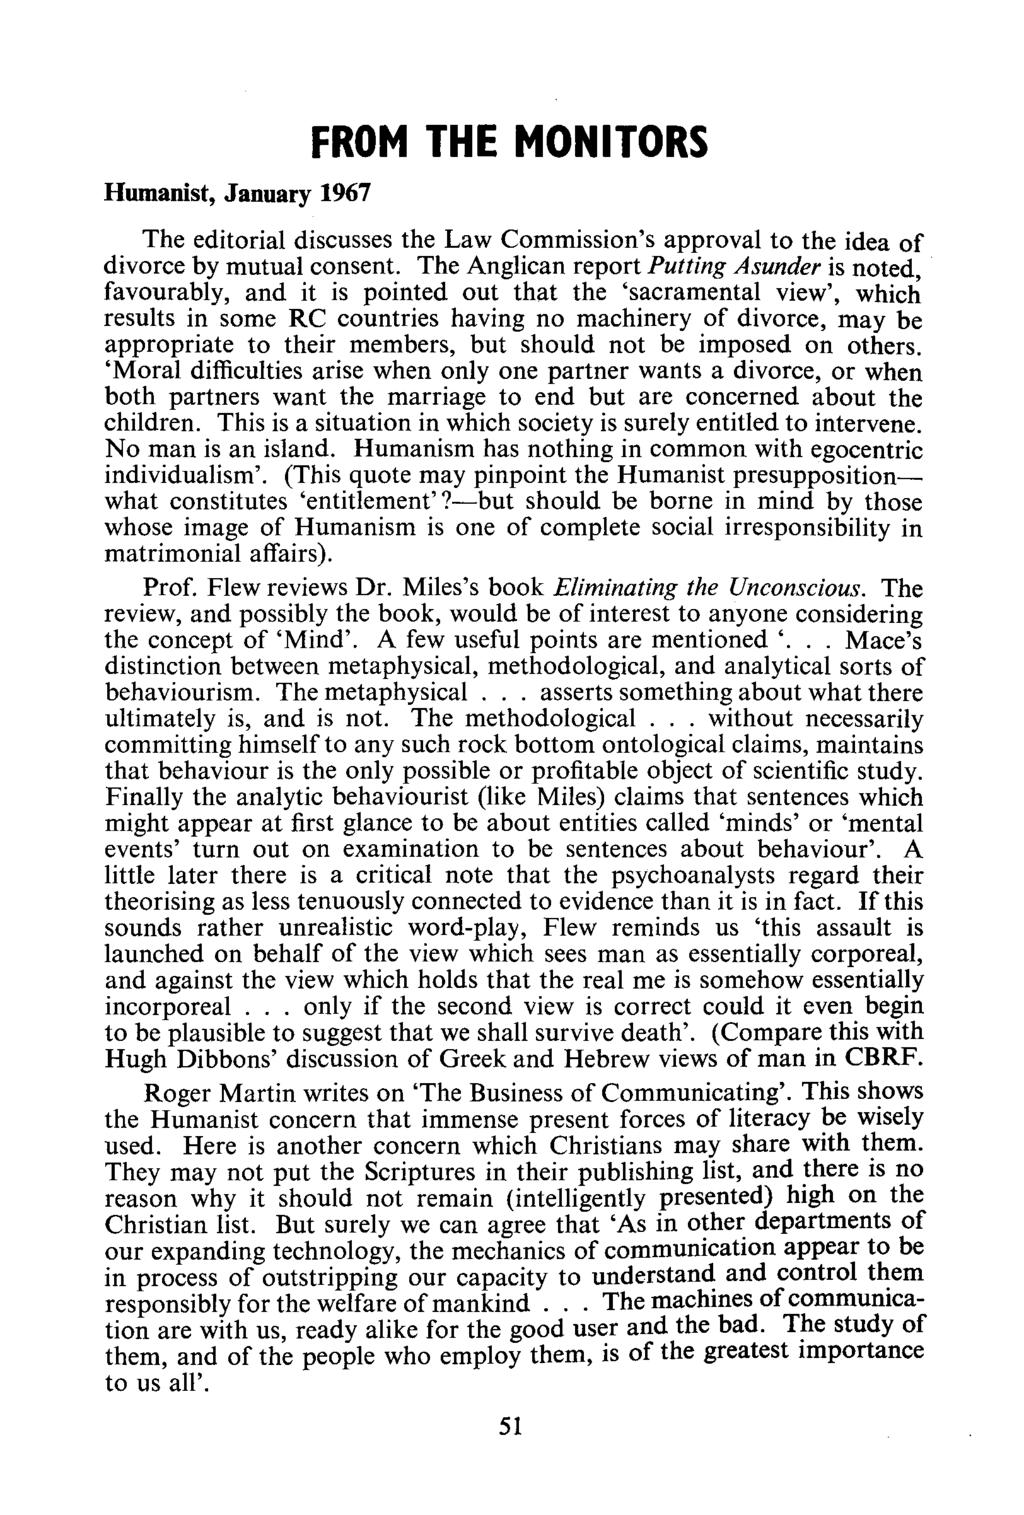 Humanist, January 1967 FROM THE MONITORS The editorial discusses the Law Commission's approval to the idea of divorce by mutual consent.